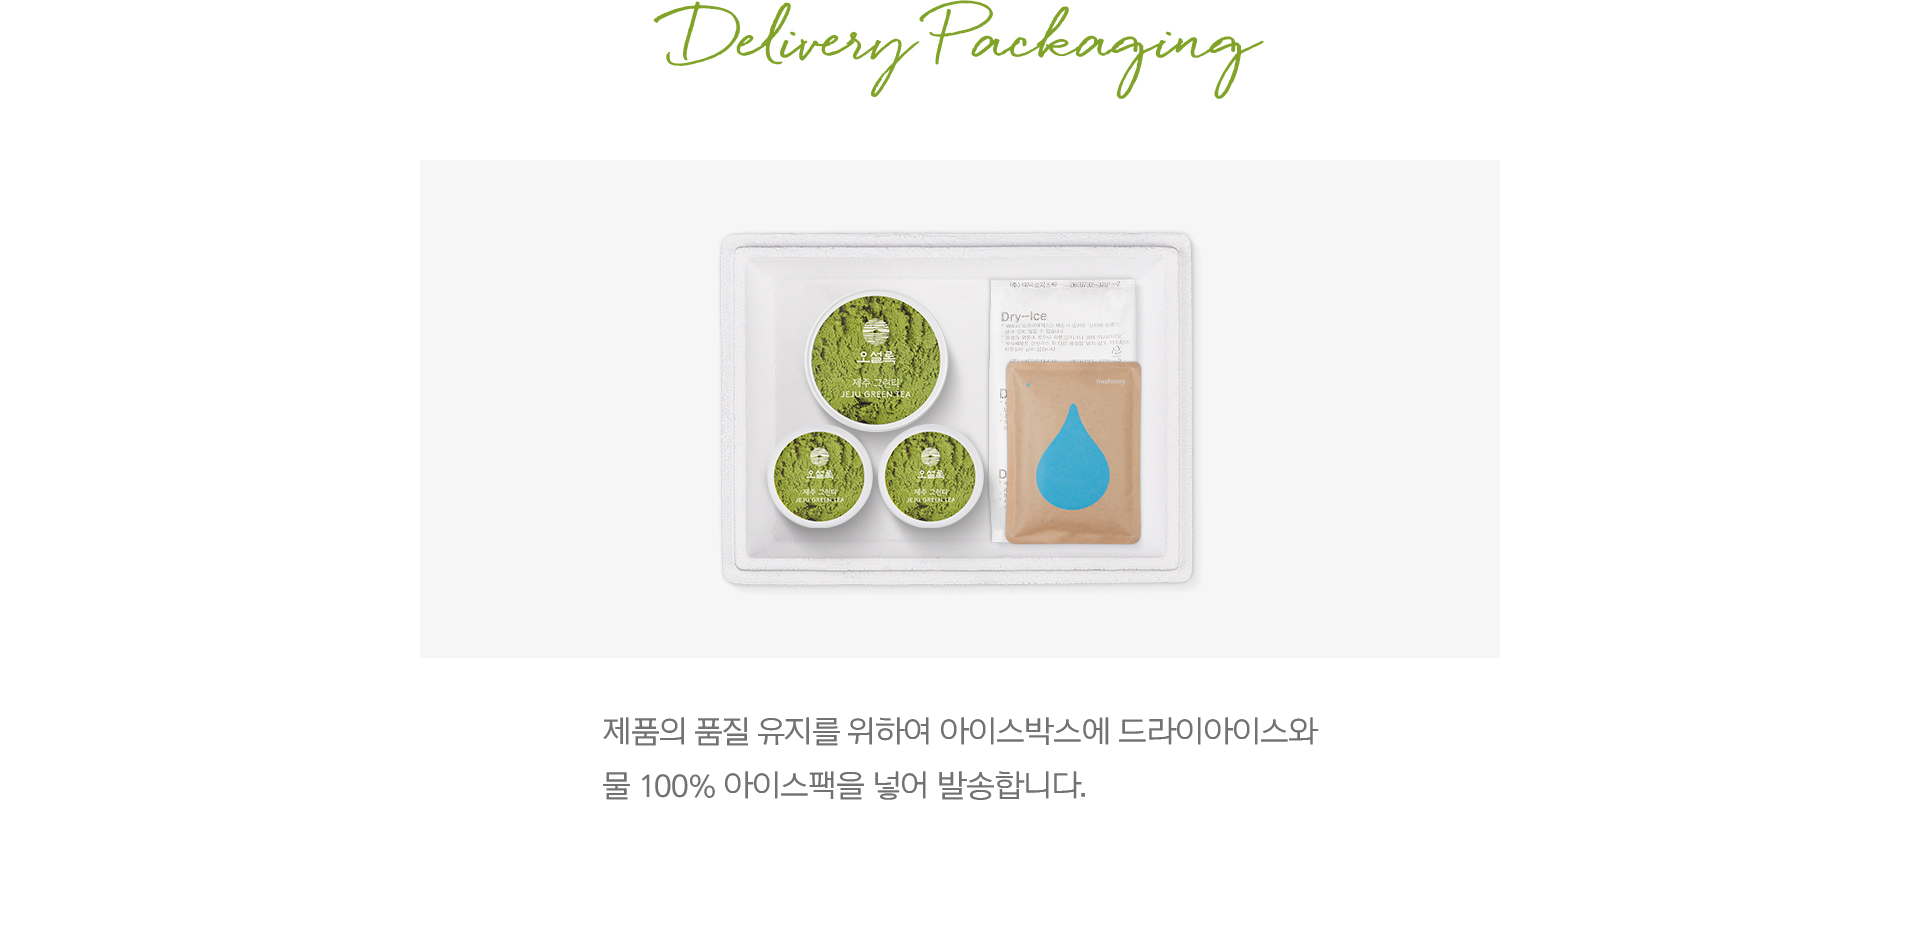 Delivery Packaging